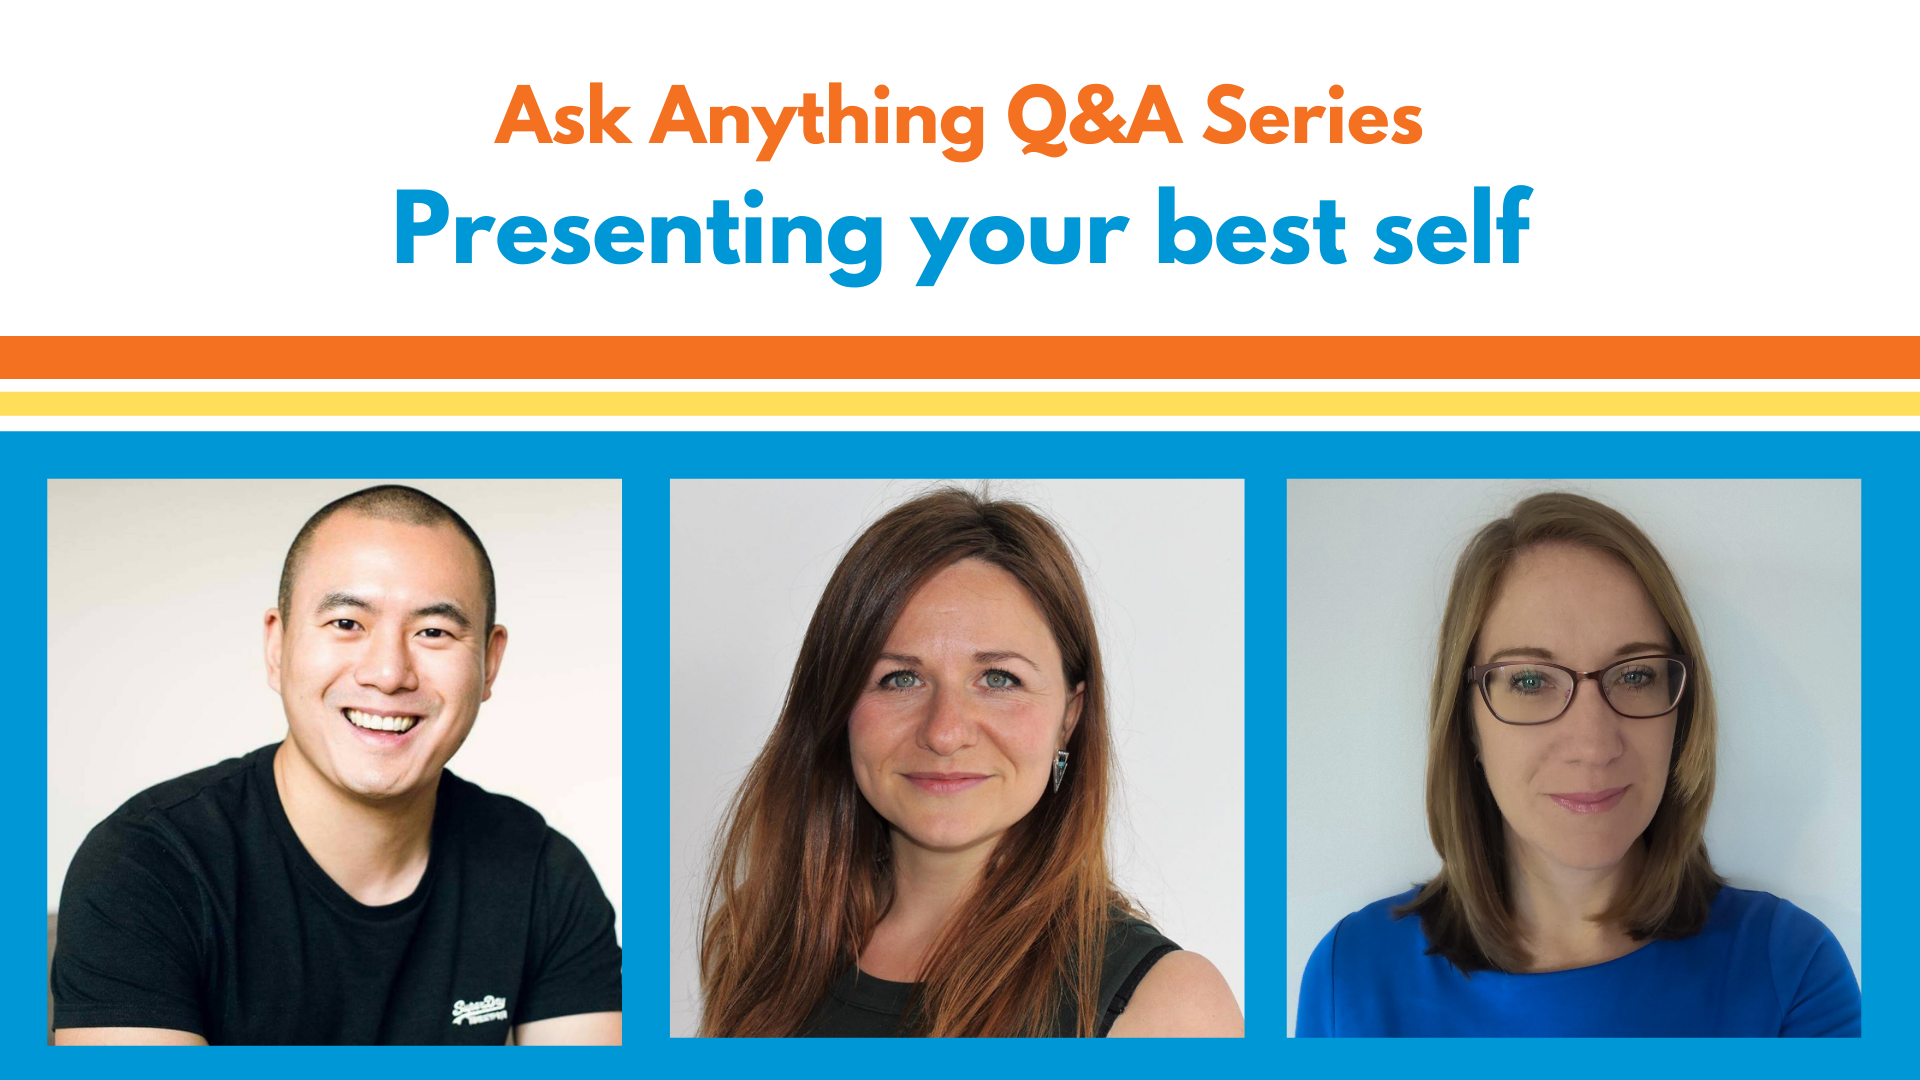 Ask Anything Presenting your Best Self Event Write up